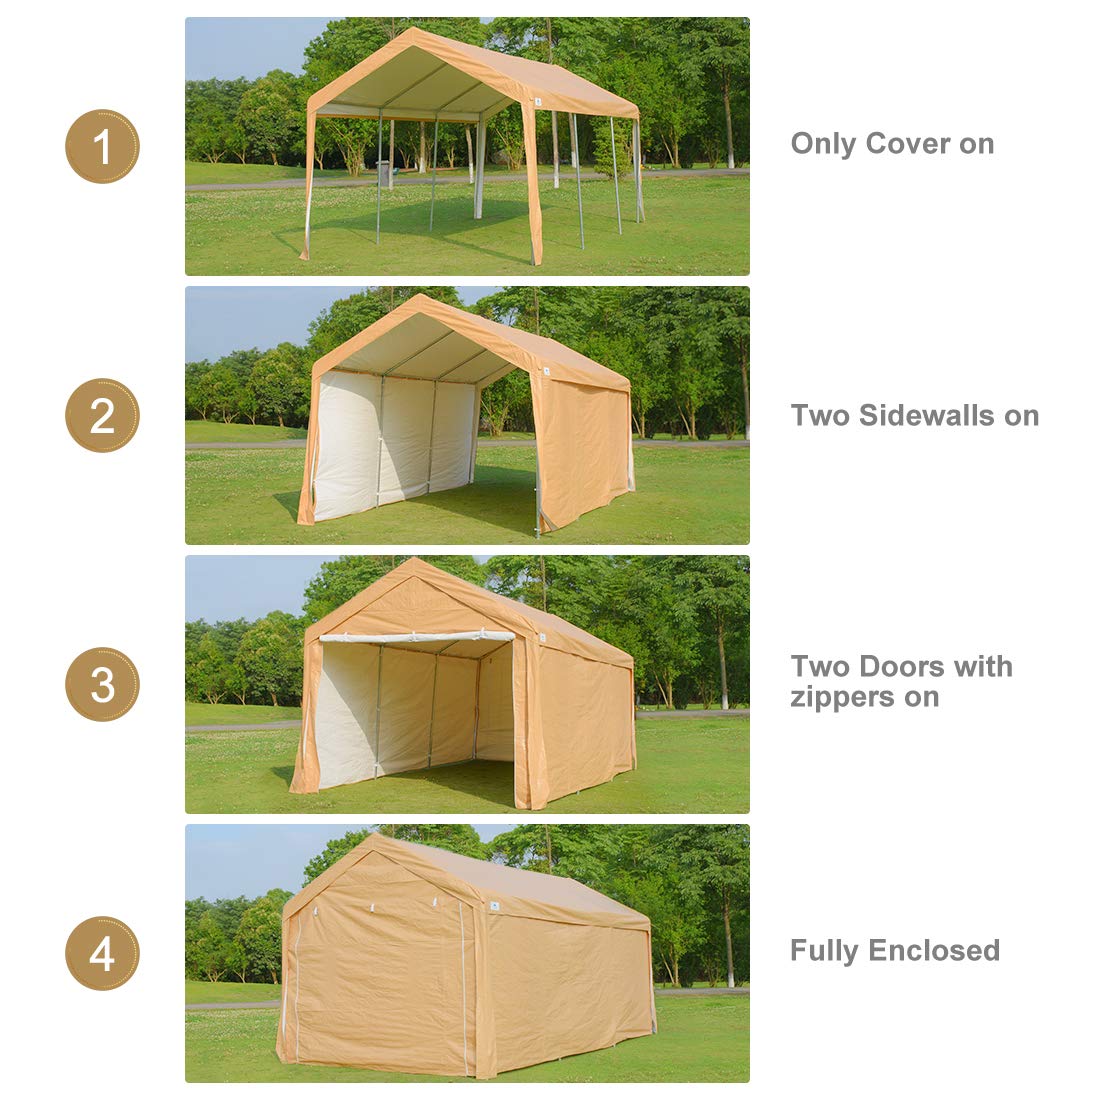 ADVANCE OUTDOOR 10x20 ft Heavy Duty Carport Car Canopy Garage Shelter Boat Party Tent Shed with Removable Sidewalls and Zipper Doors, Beige